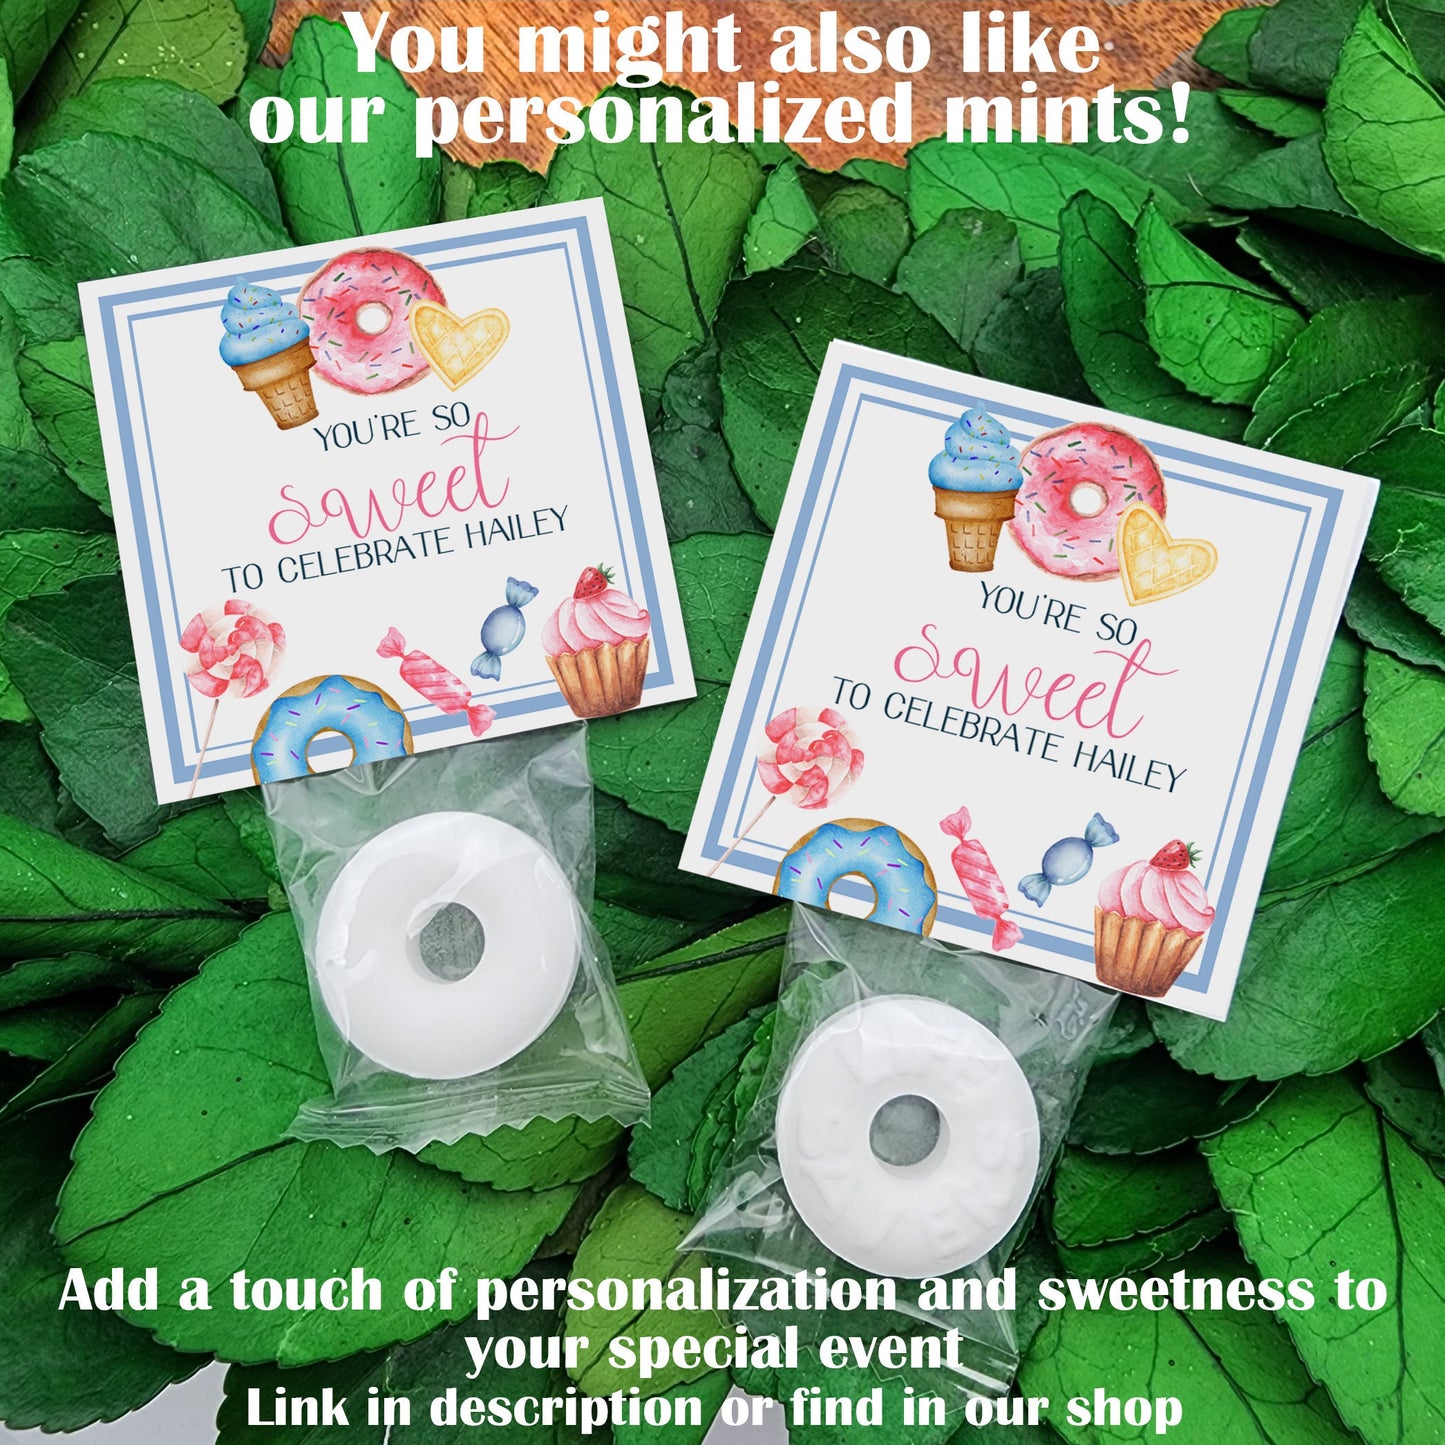 Two sweet party favors - Sweet one party favors - Candyland party favors - Candy birthday favors - Sweet celebration